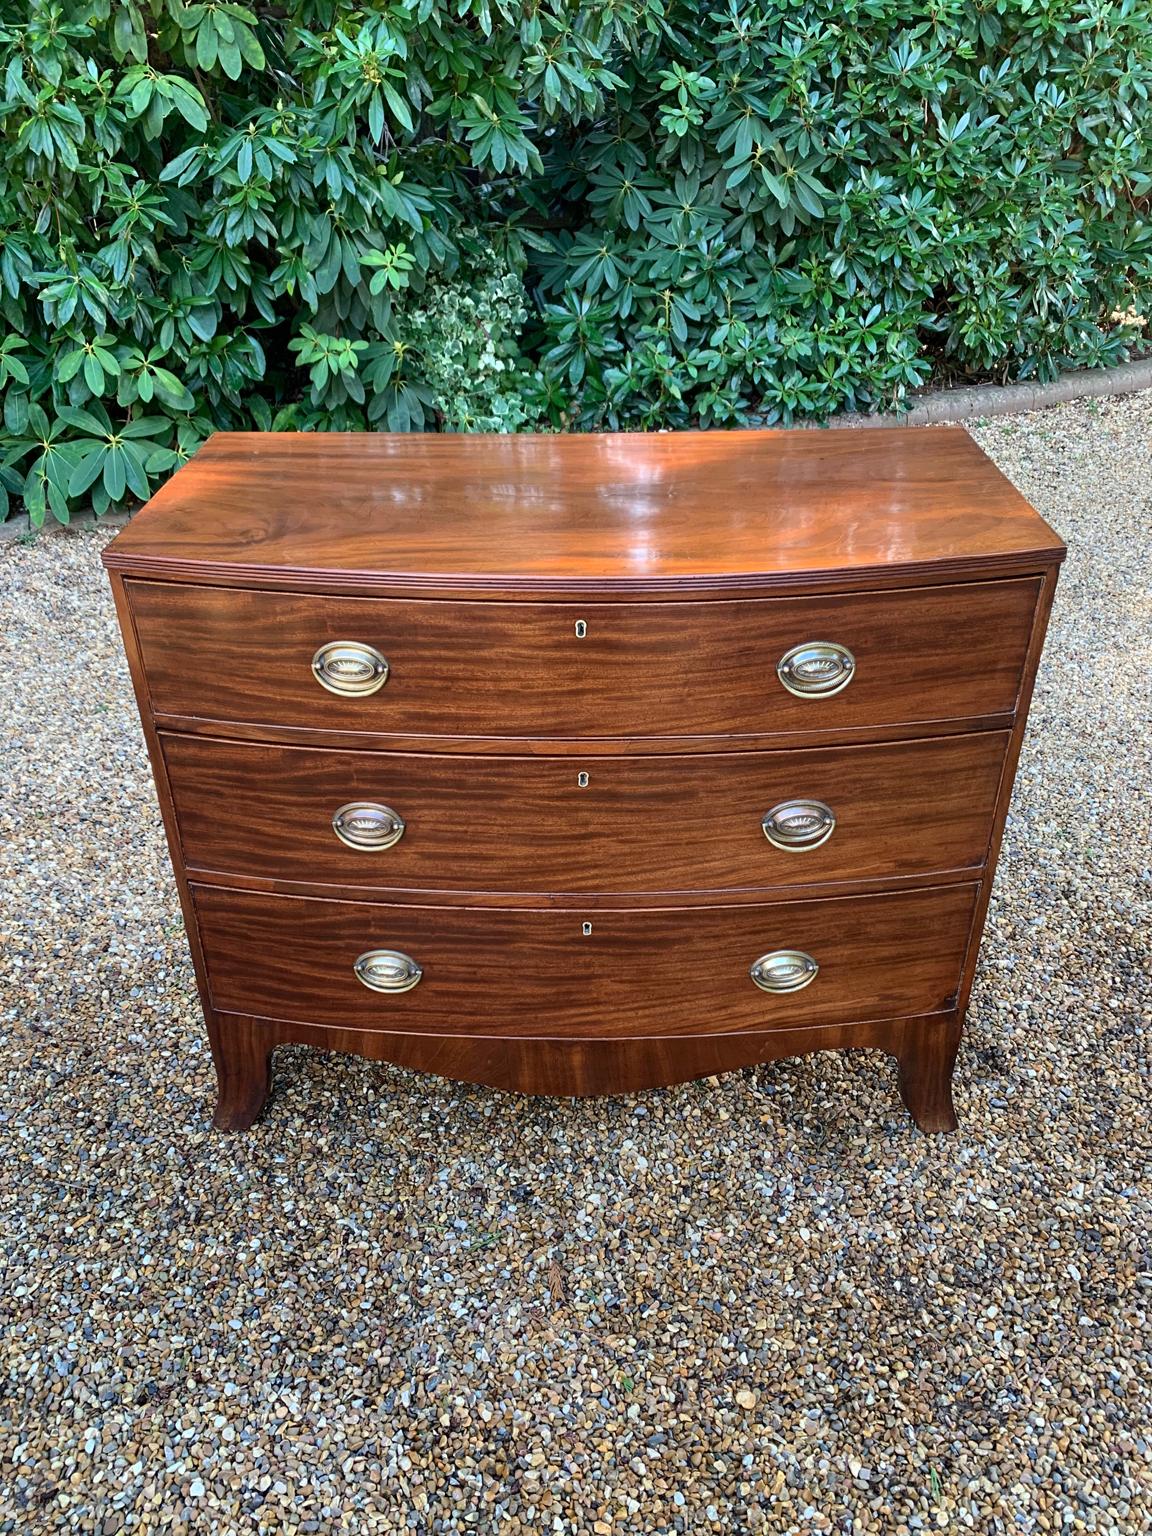 Georgian mahogany bow fronted chest of drawers with three long oak lined drawers, oval brass handles and splayed feet.